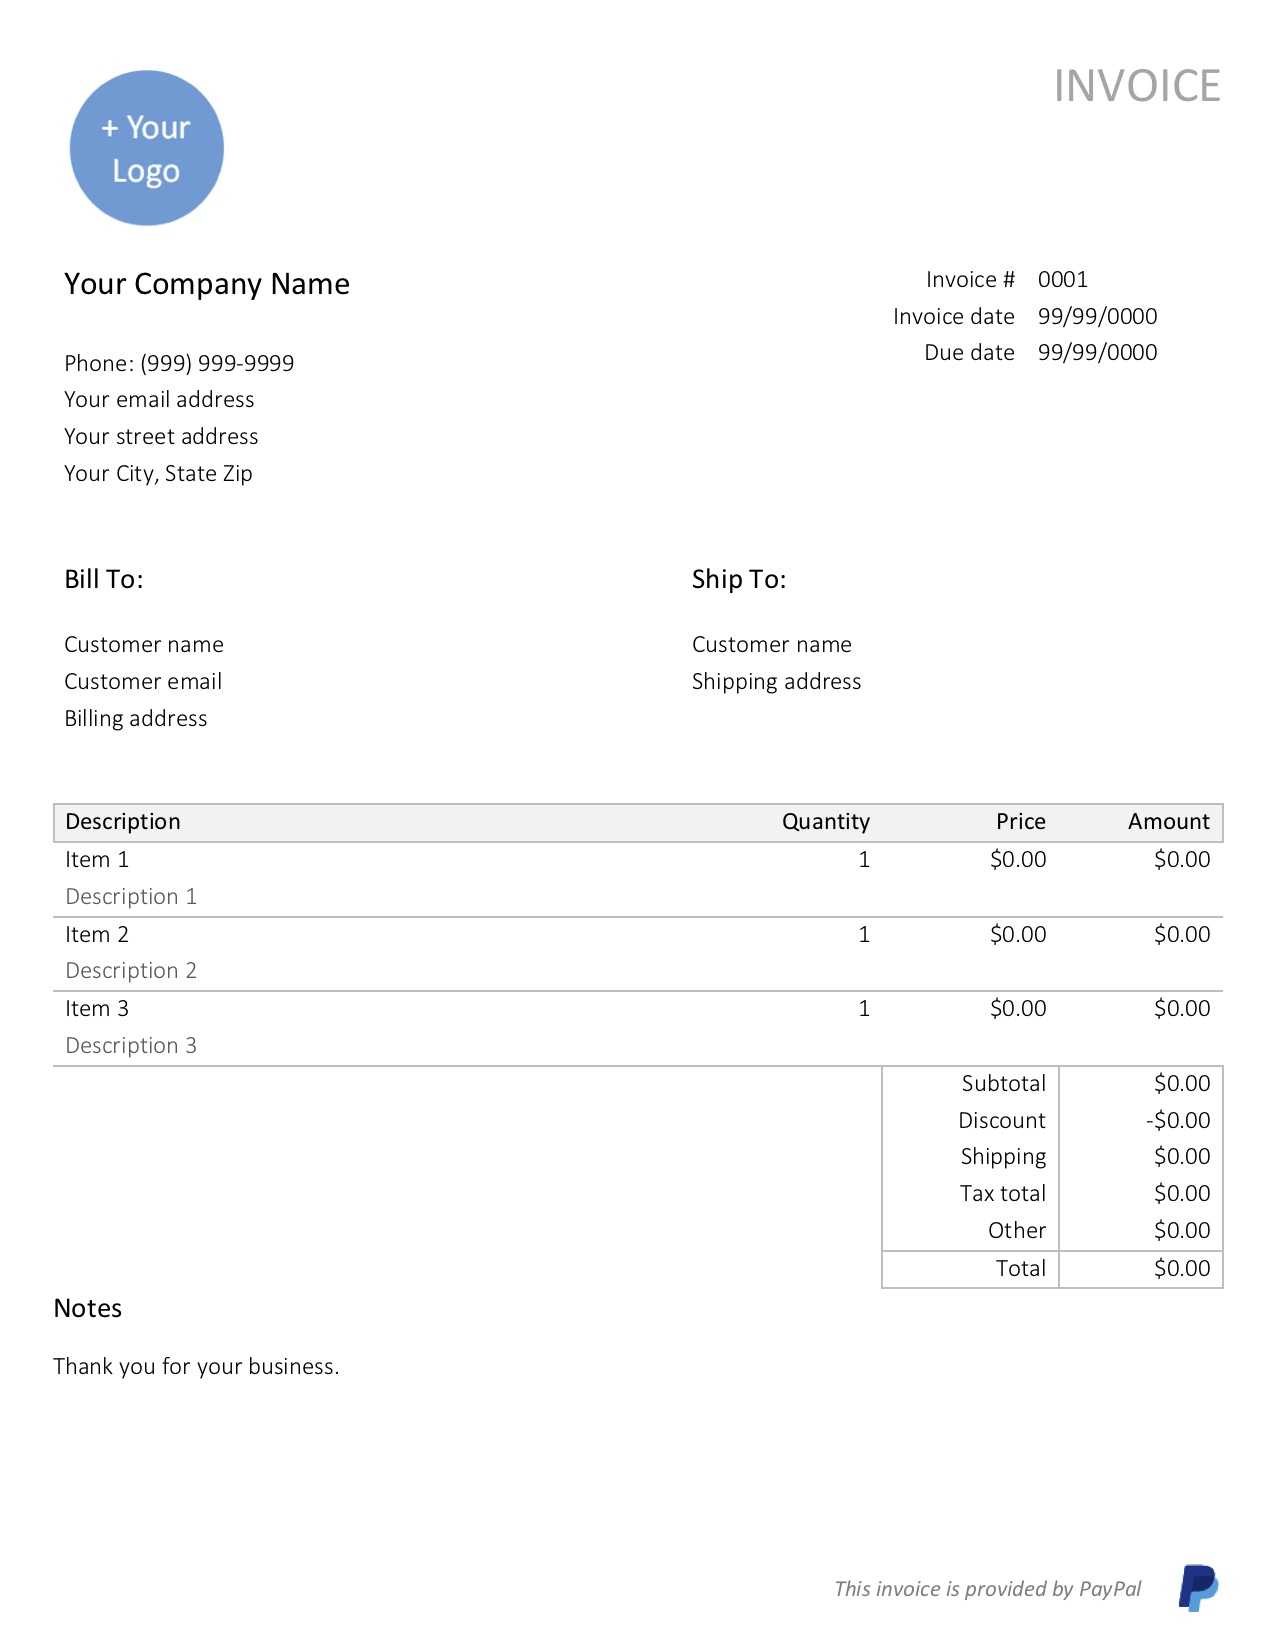 Free, Downloadable Sample Invoice Template | Paypal For Free Downloadable Invoice Template For Word